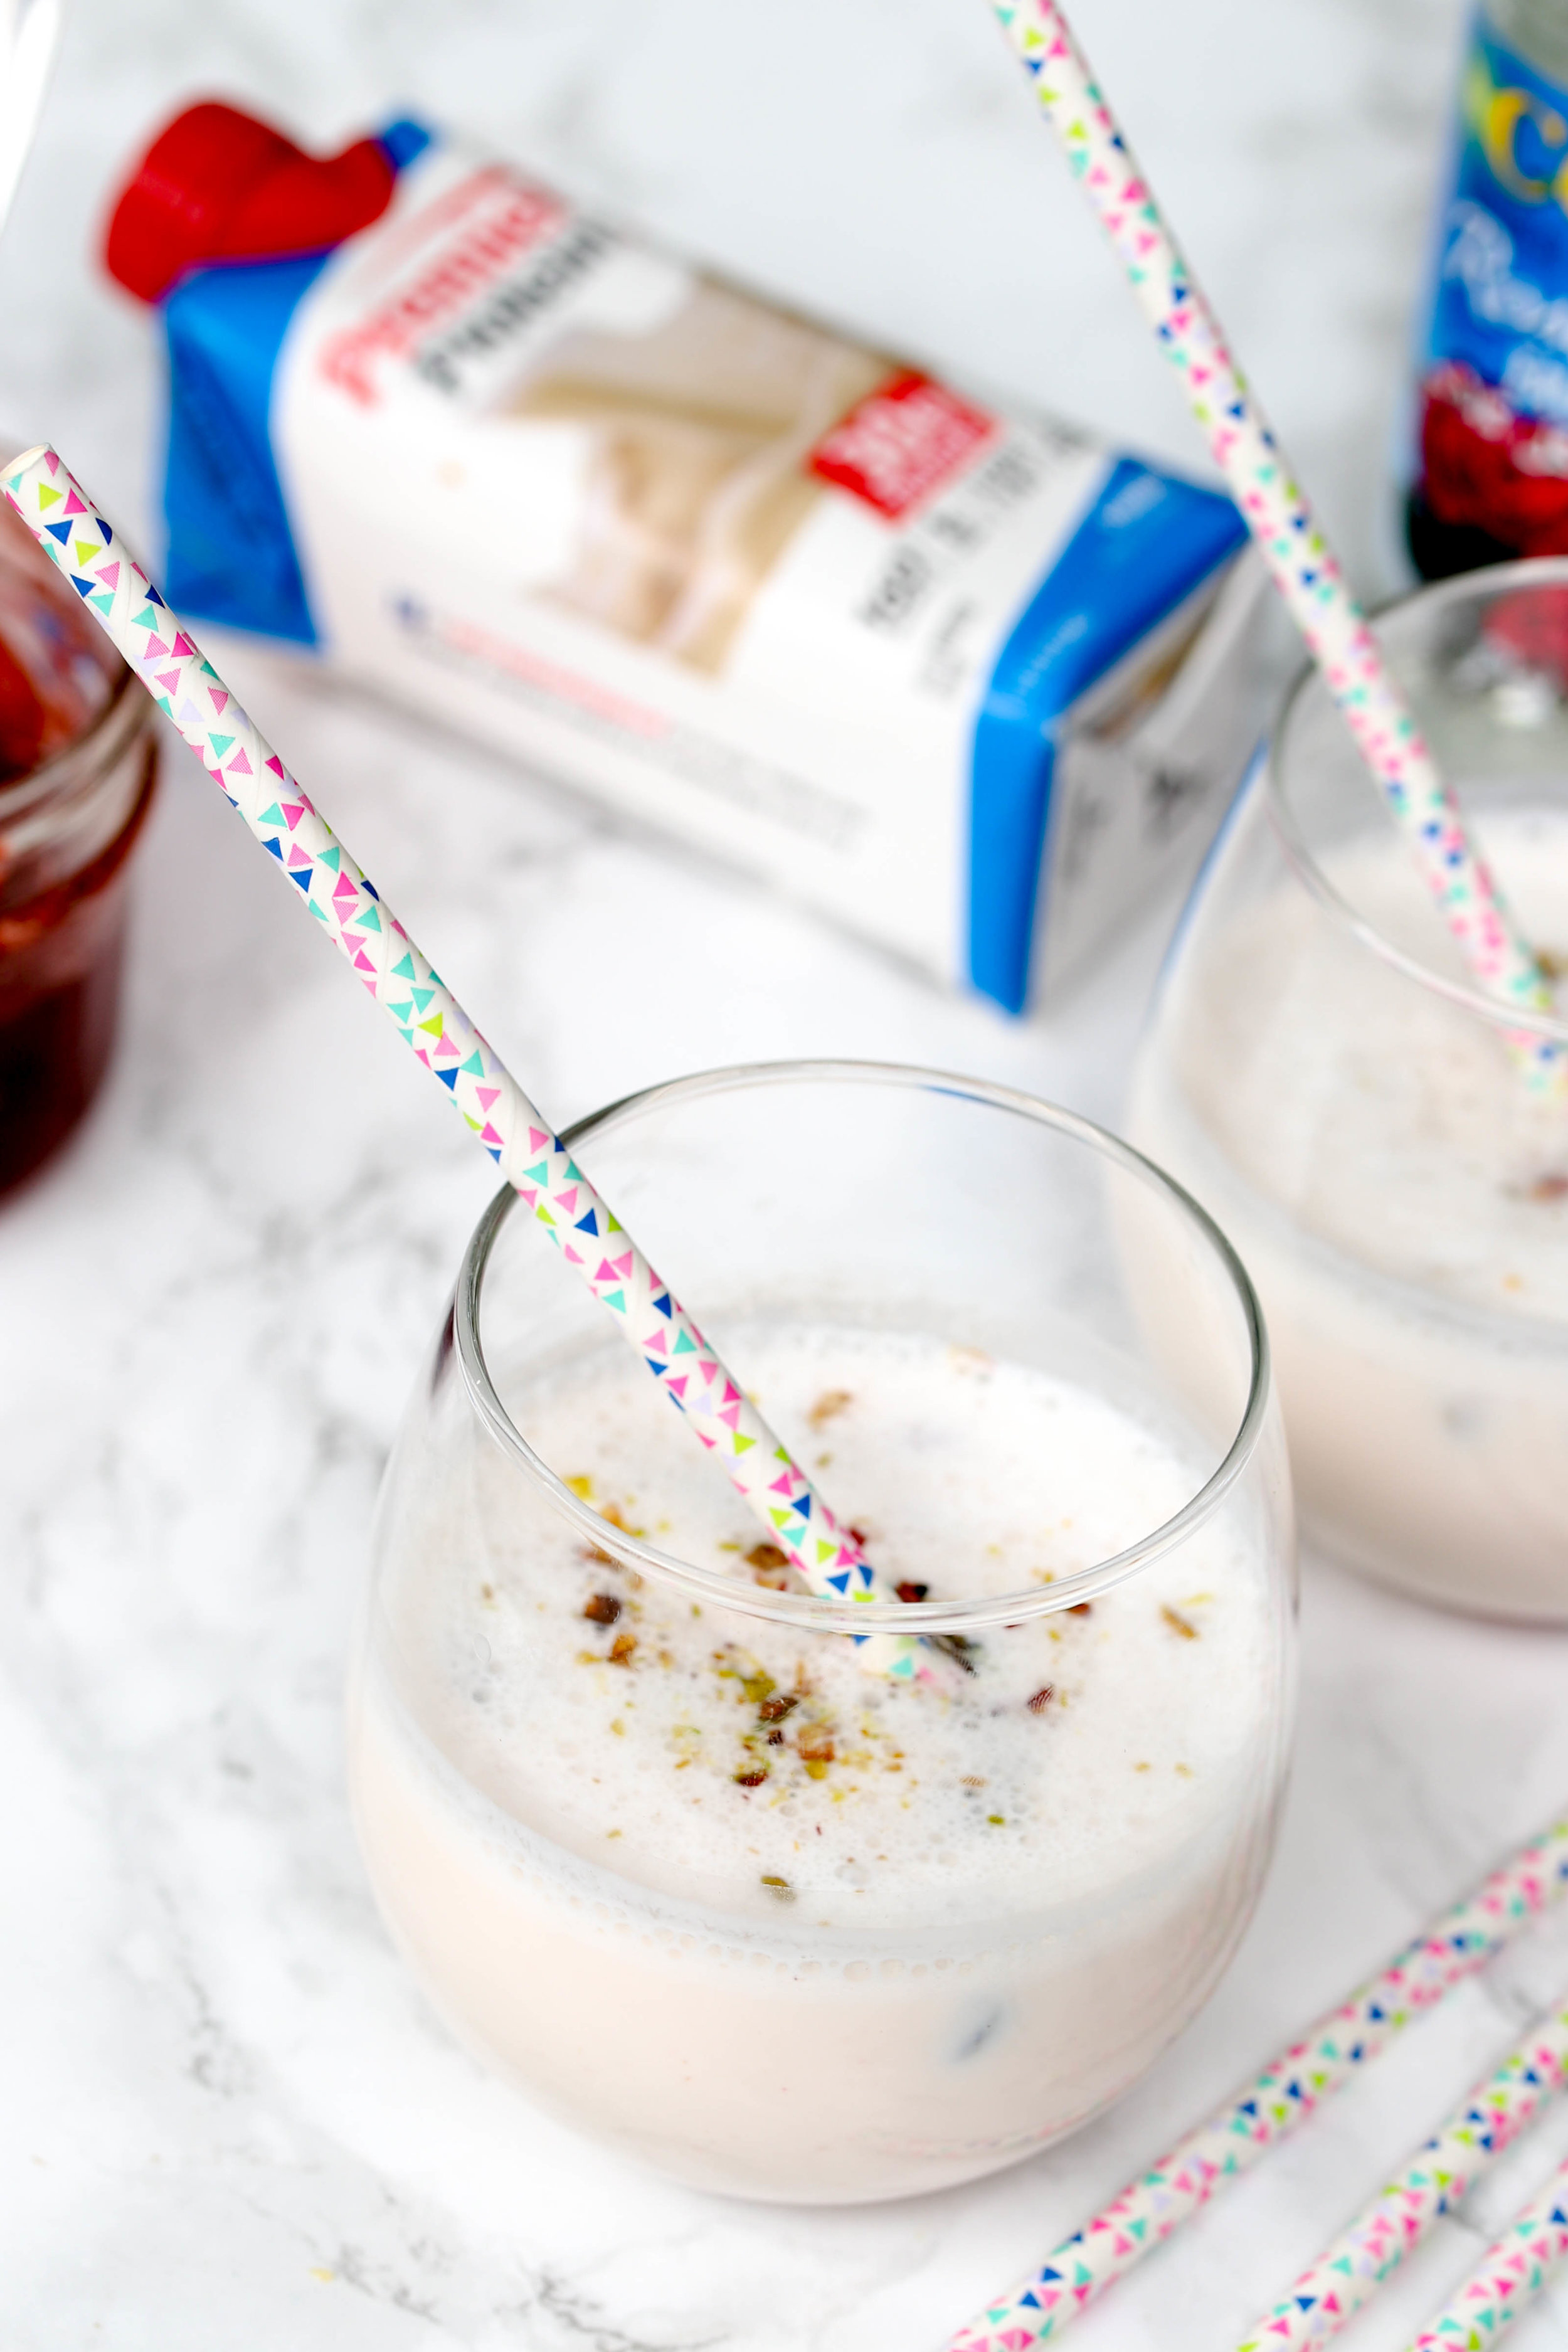 Vanilla Rose Lassi Protein Shake is a delicious shake that is high in protein and packed with so many flavors from rose jam, rose water, and cardamom!